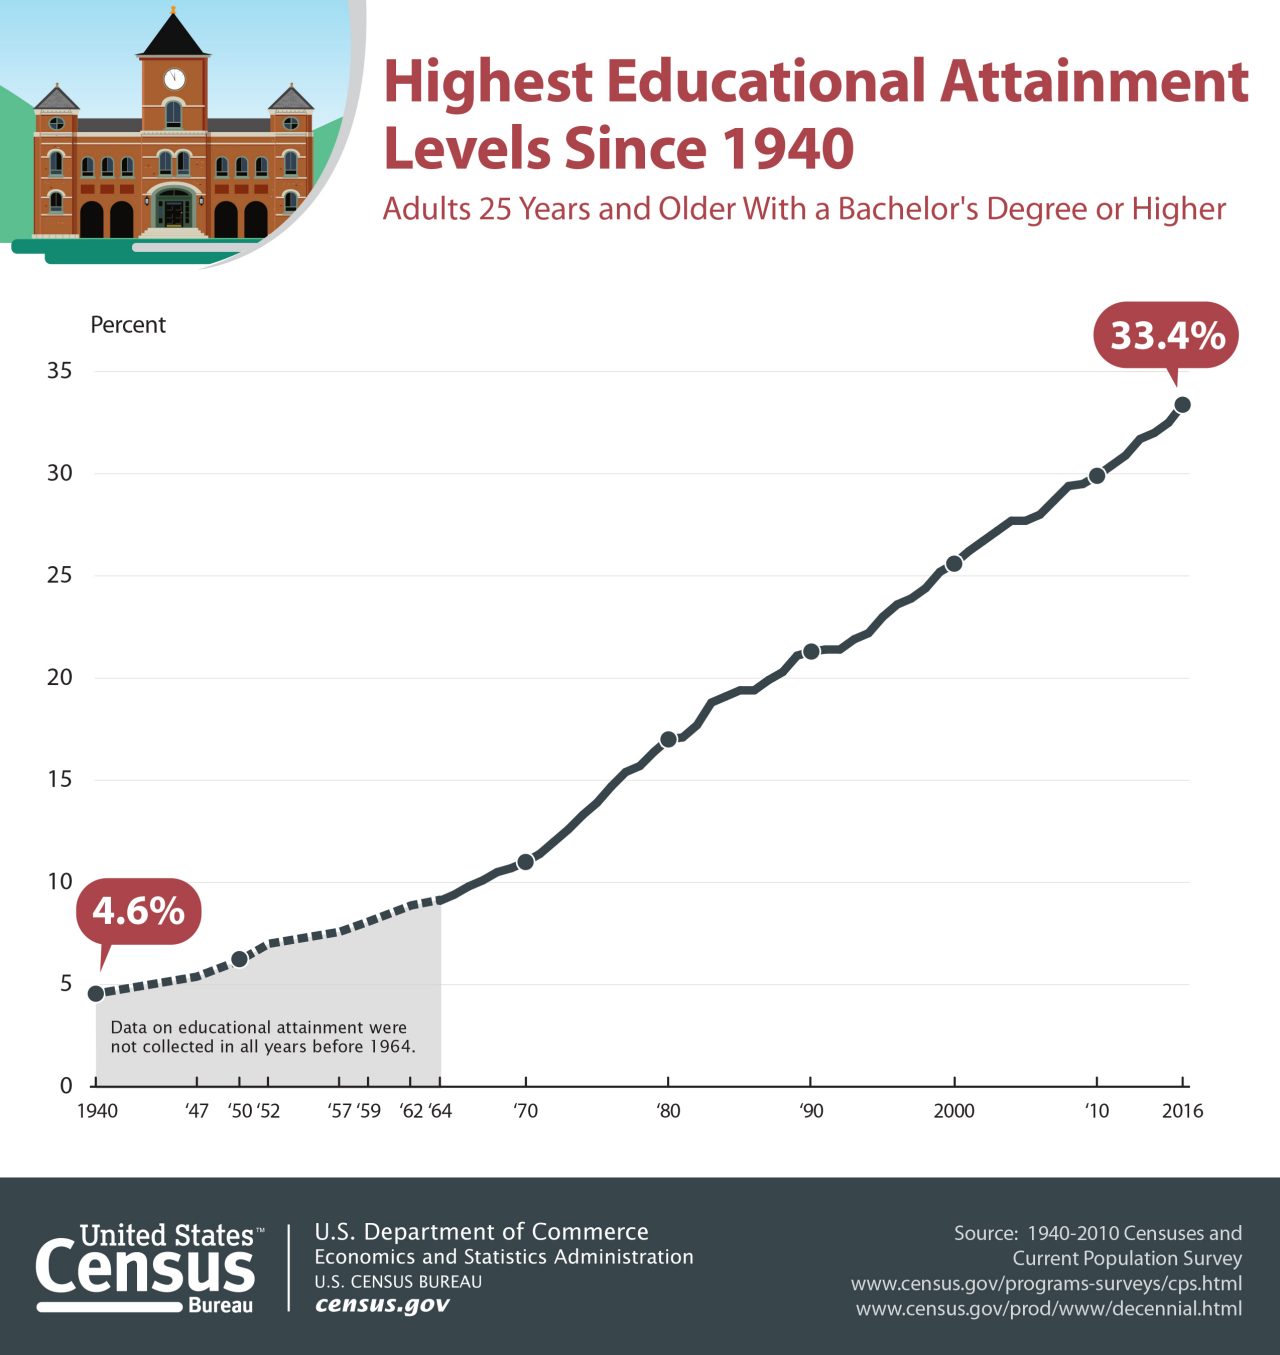 Highest Education Attainment Levels Since 1940